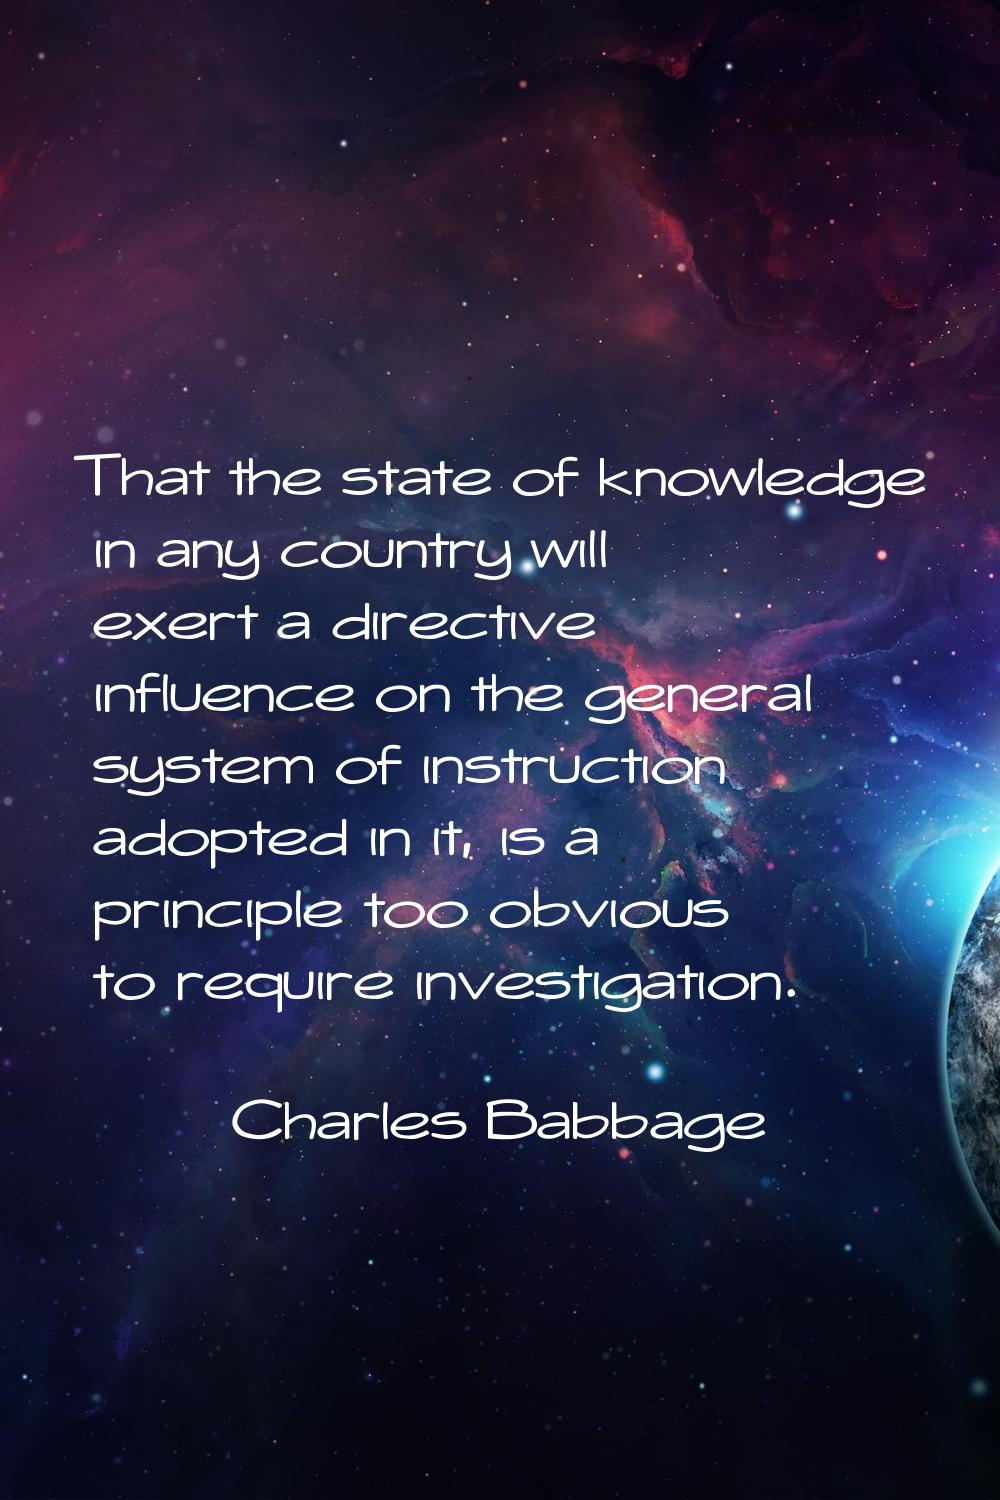 That the state of knowledge in any country will exert a directive influence on the general system o